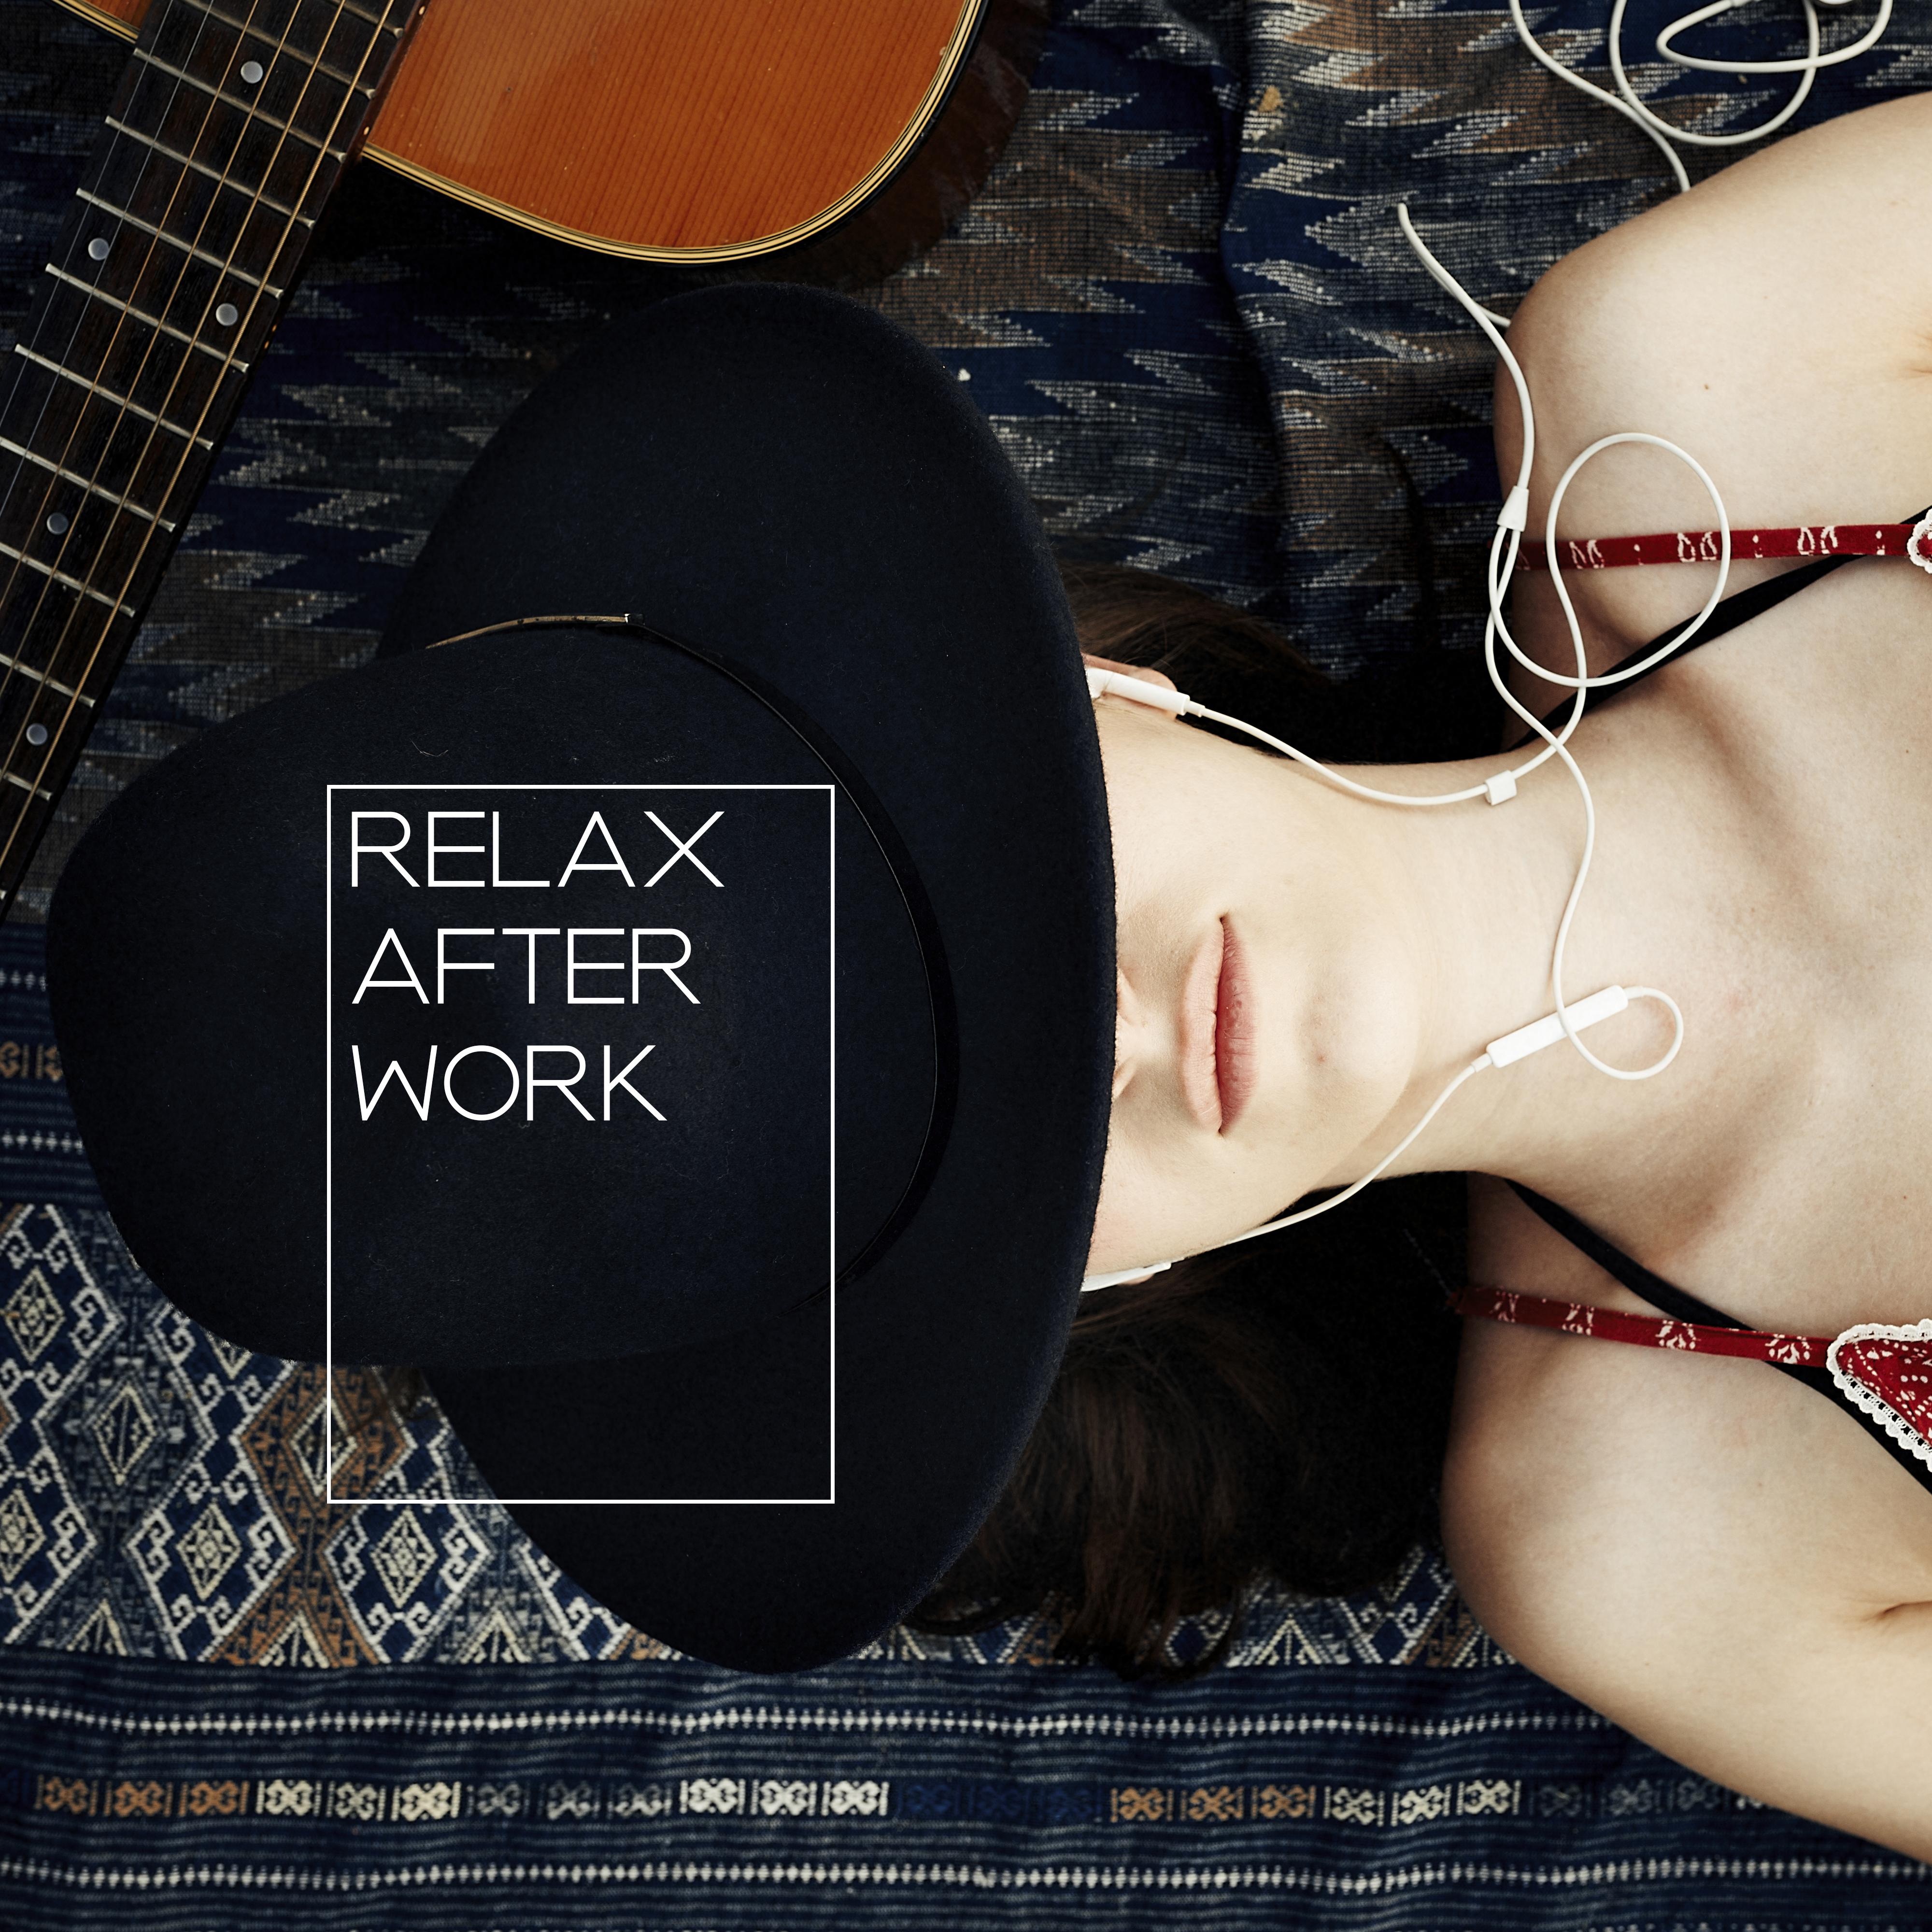 Relax After Work: Chill Out 2019, Calming Music, Reduce Stress, New Modern Chillout, Relaxing Vibes